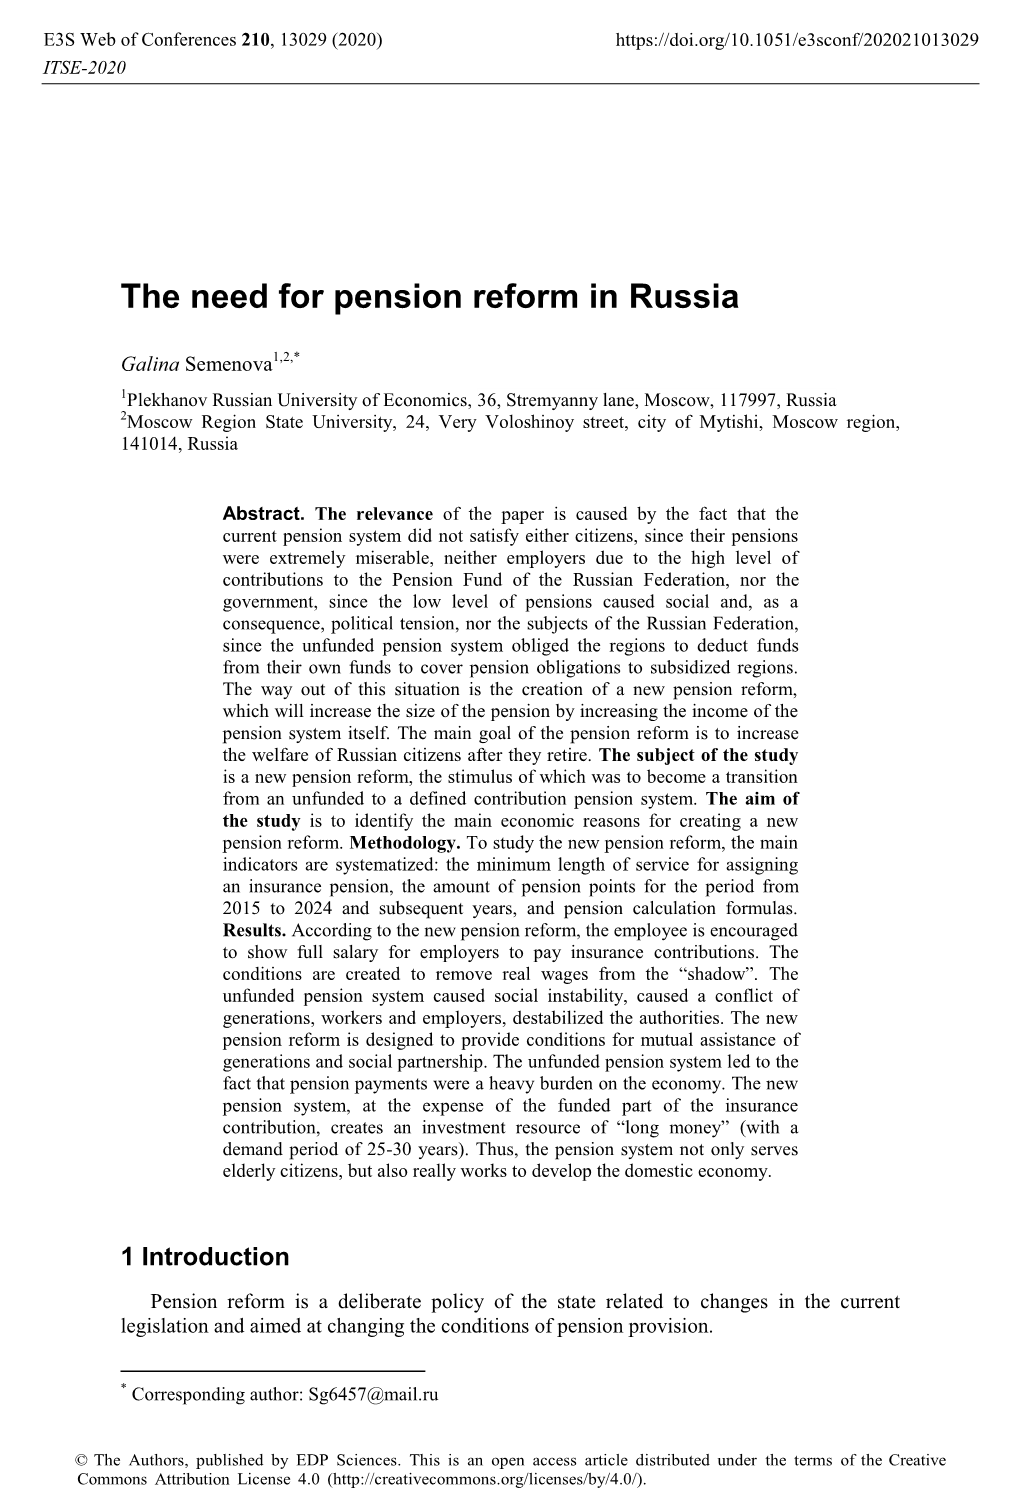 The Need for Pension Reform in Russia